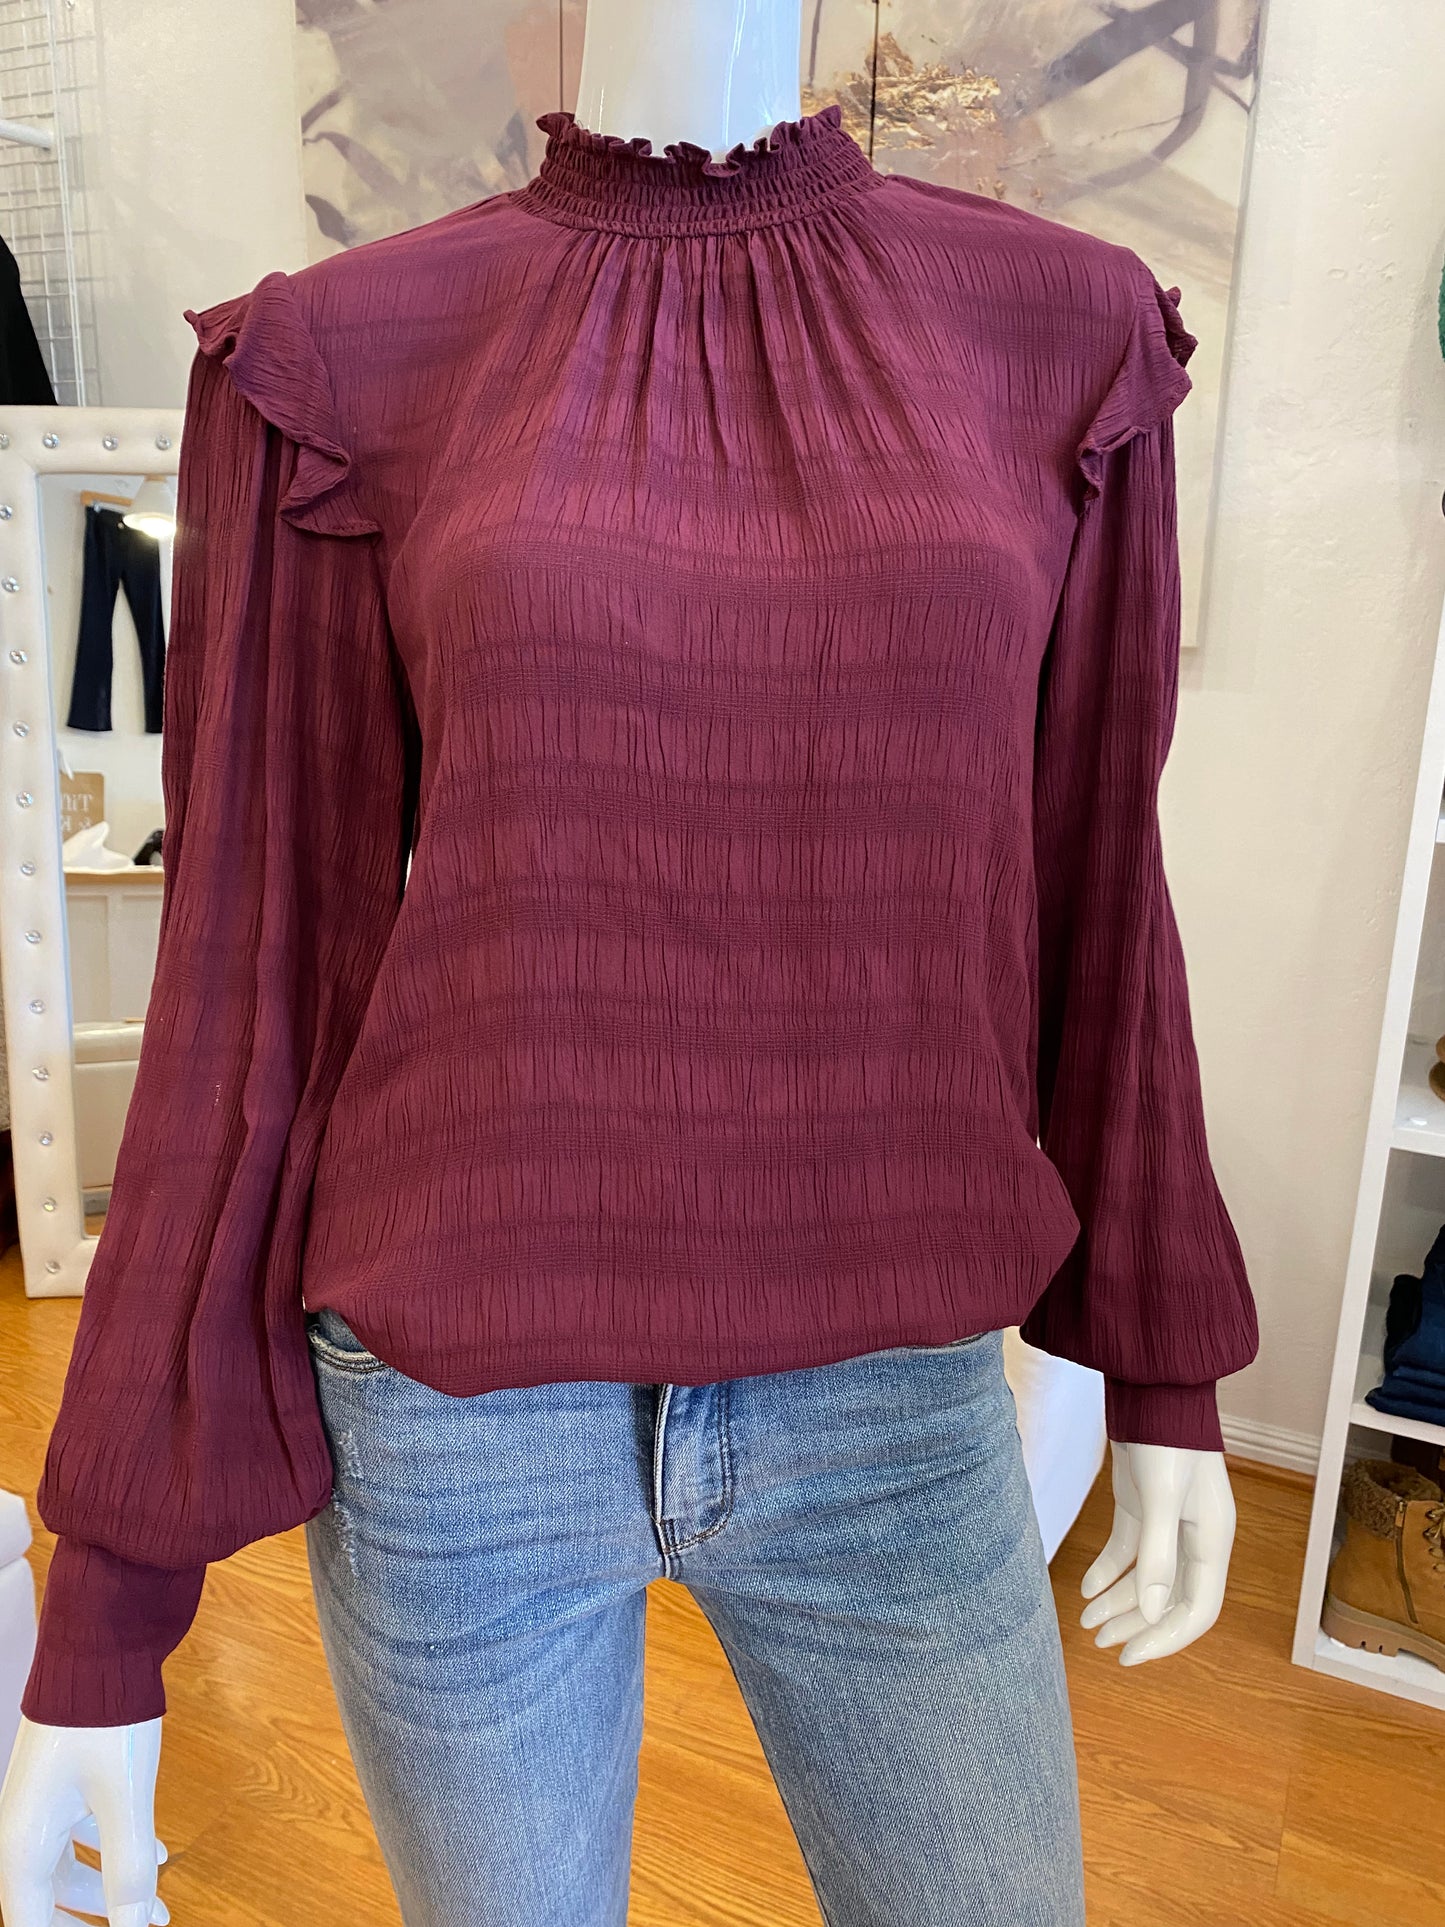 Romance Popover Blouse - Sizes XS and Small